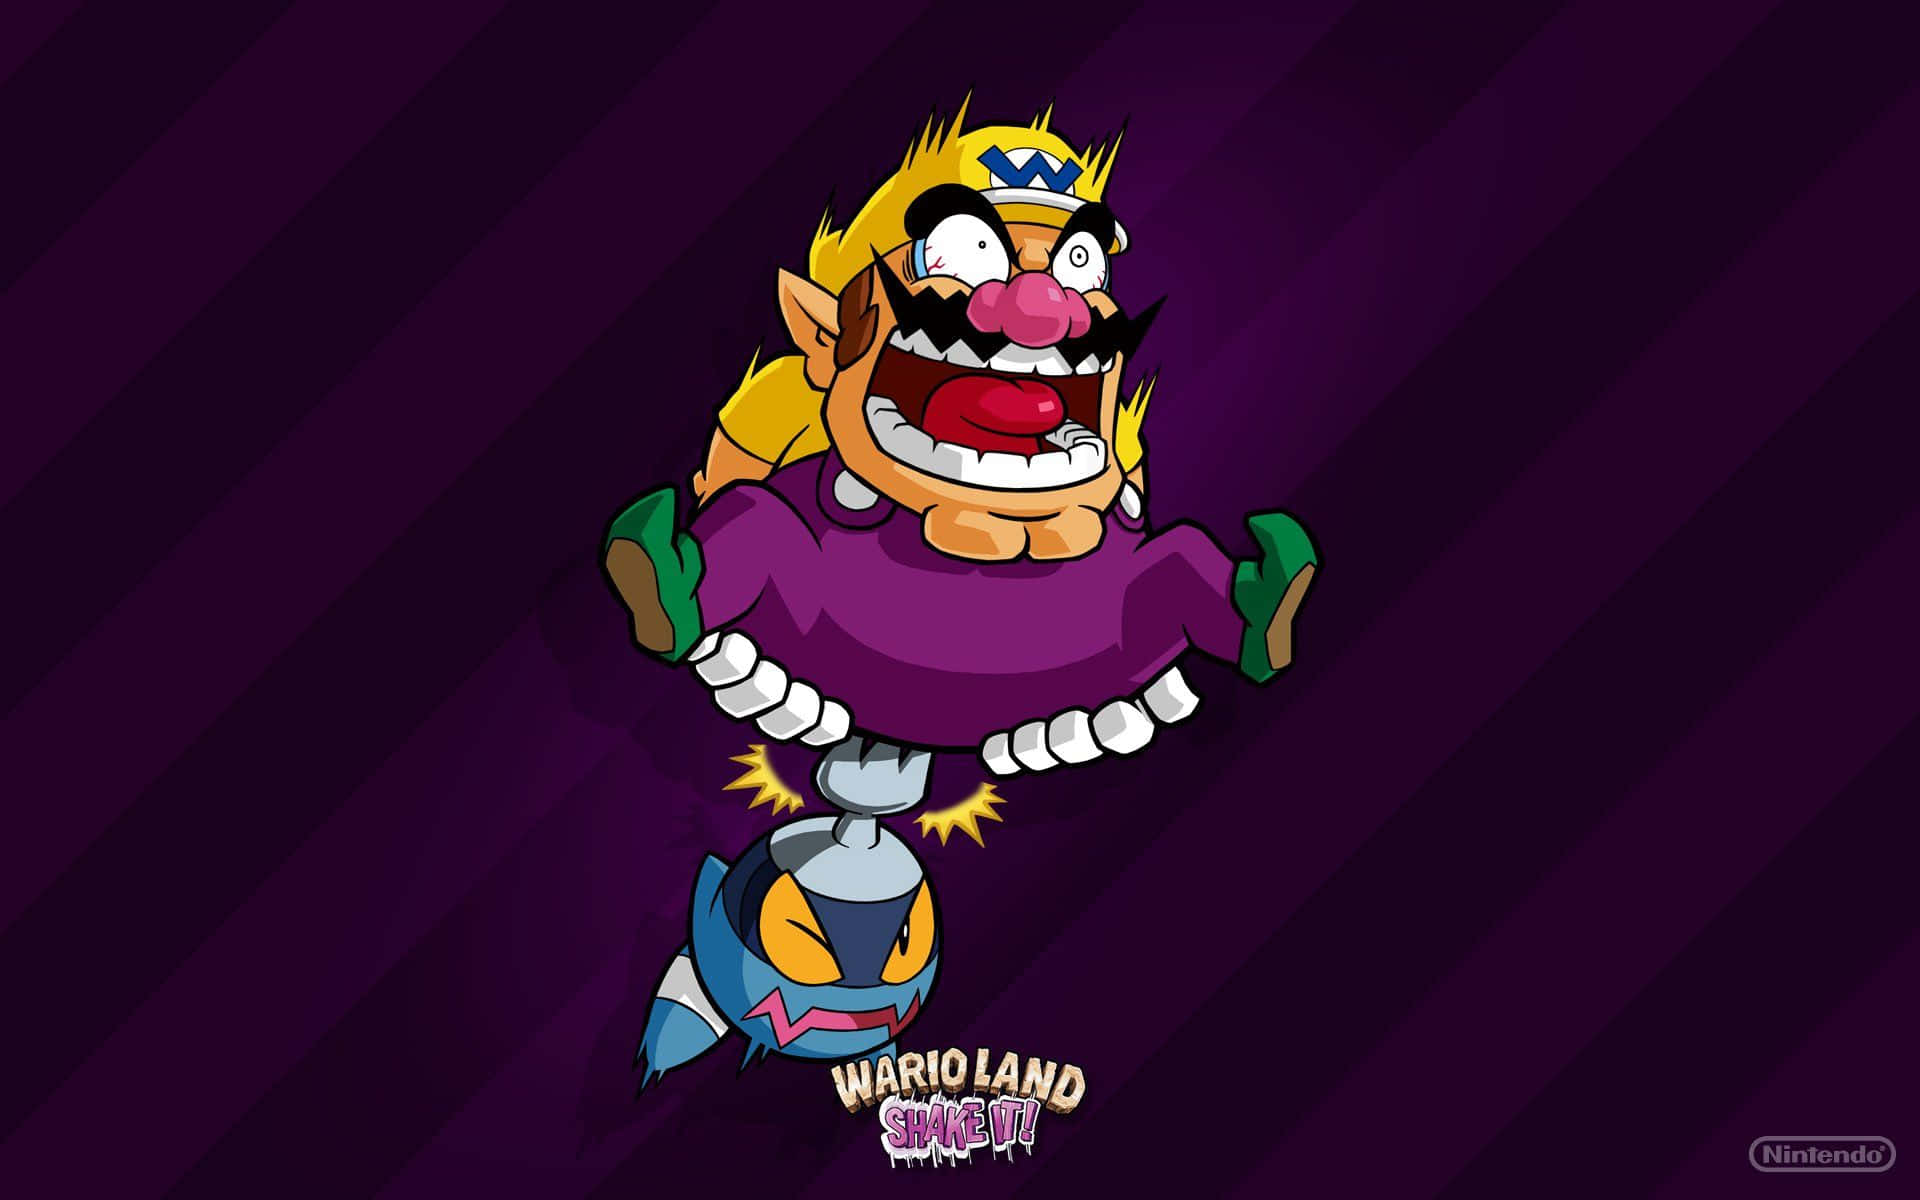 Wario, the mischievous antagonist, taking center stage in this vibrant artwork Wallpaper